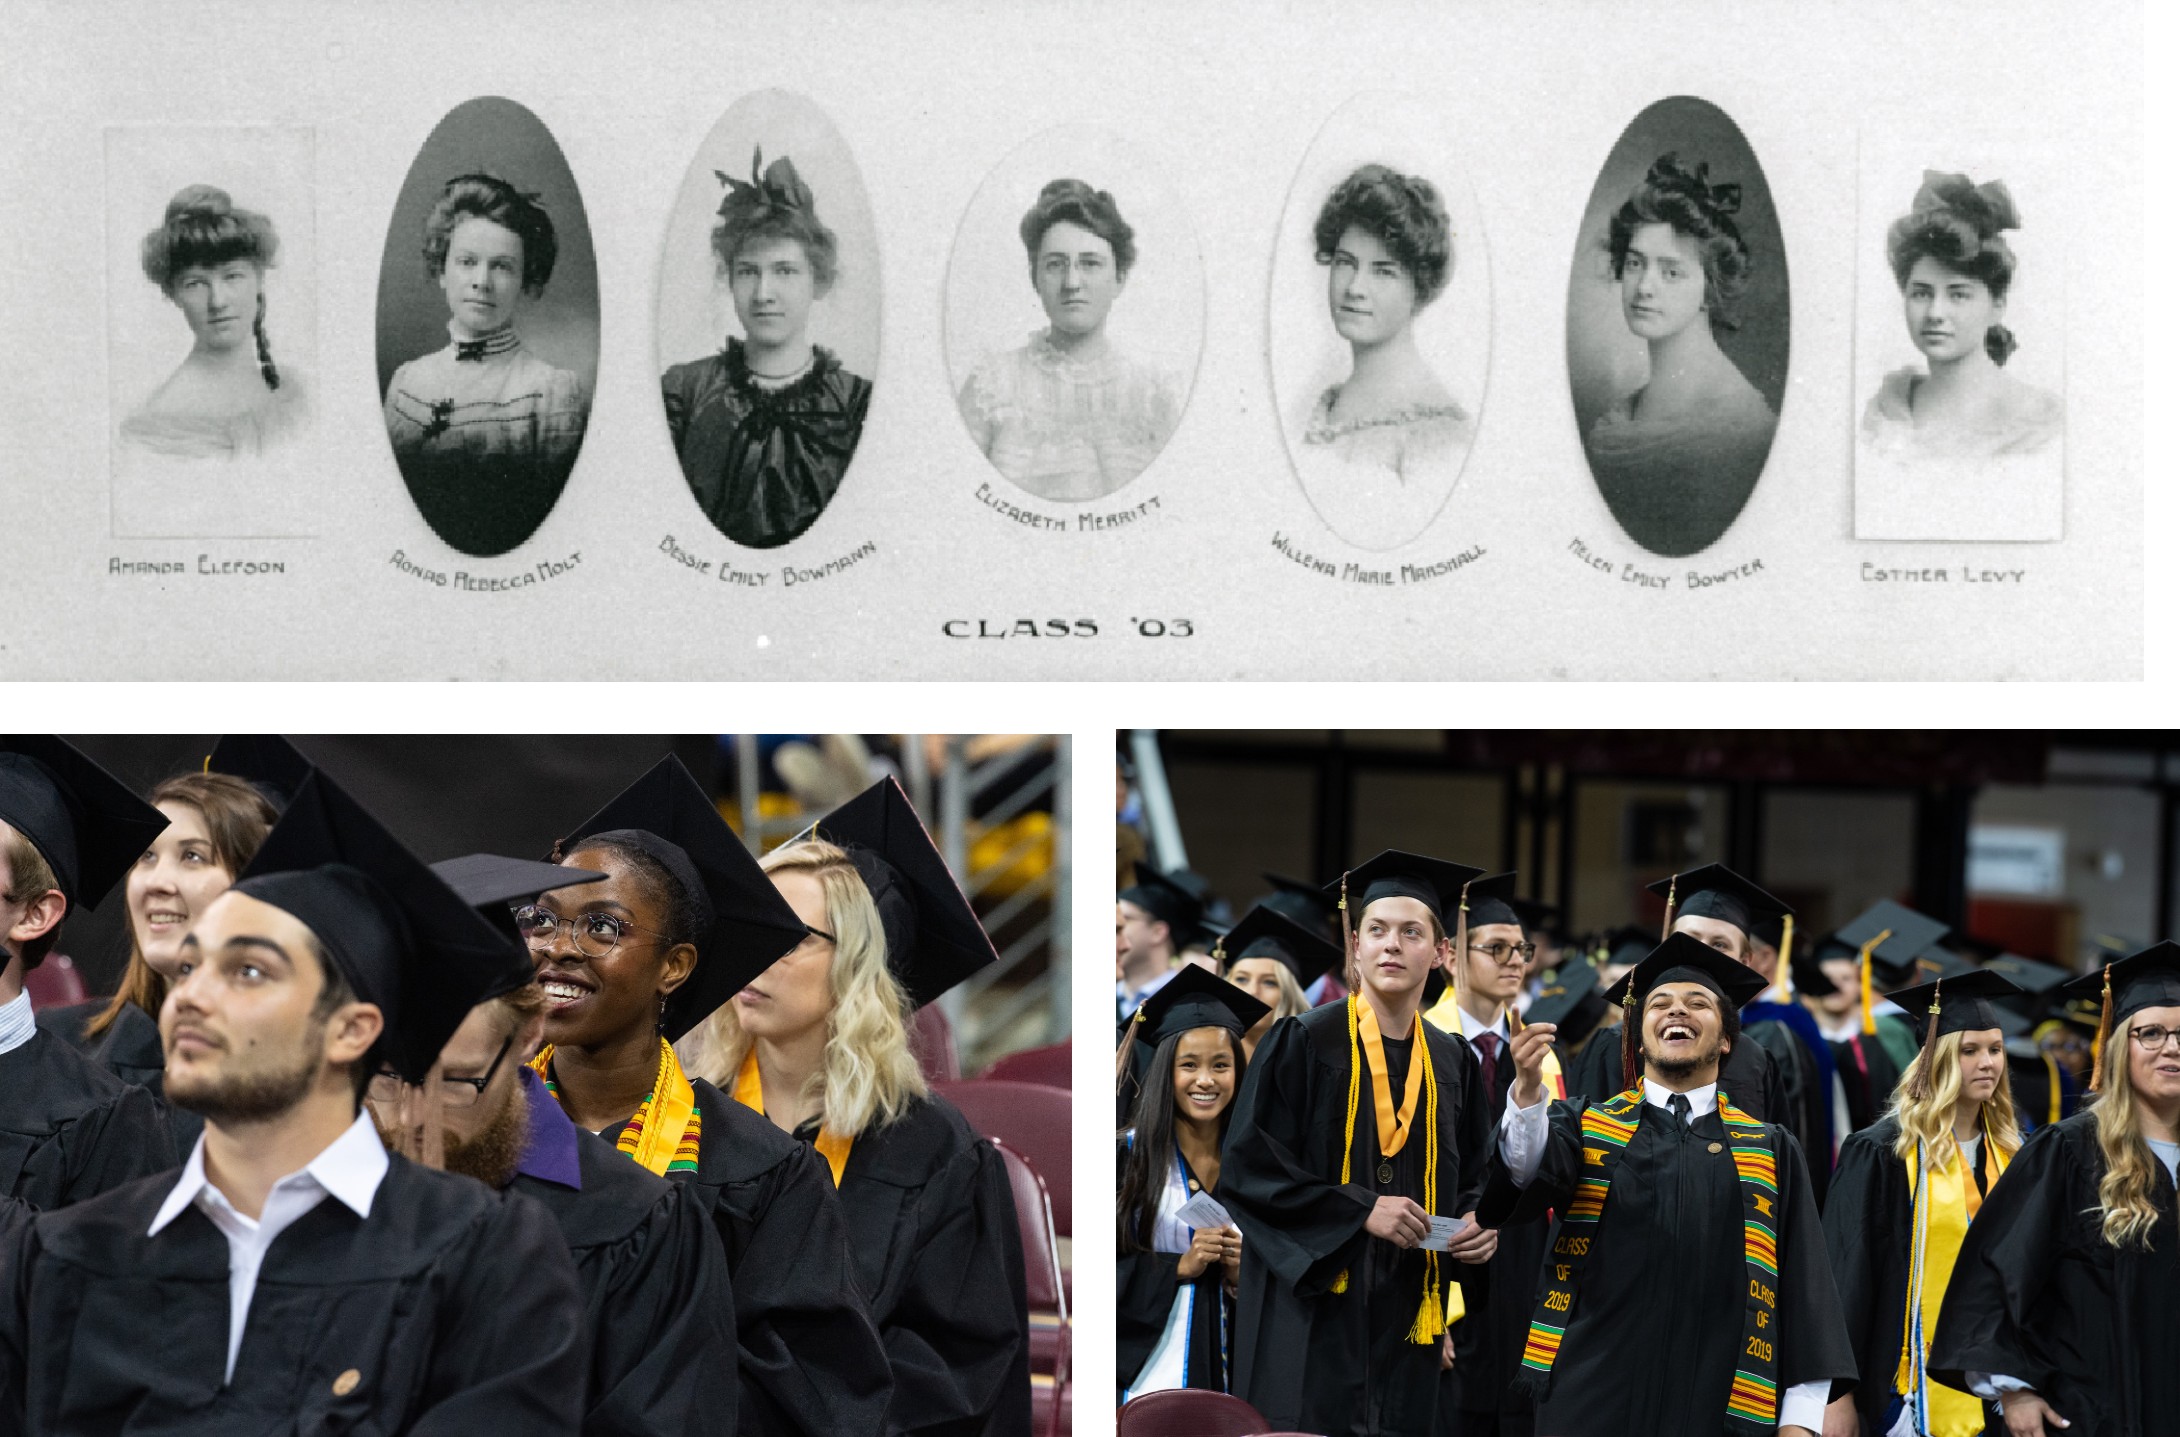 Three photos: On the top, a 19th century graduating class. Bottom, Students from the class of 2018.